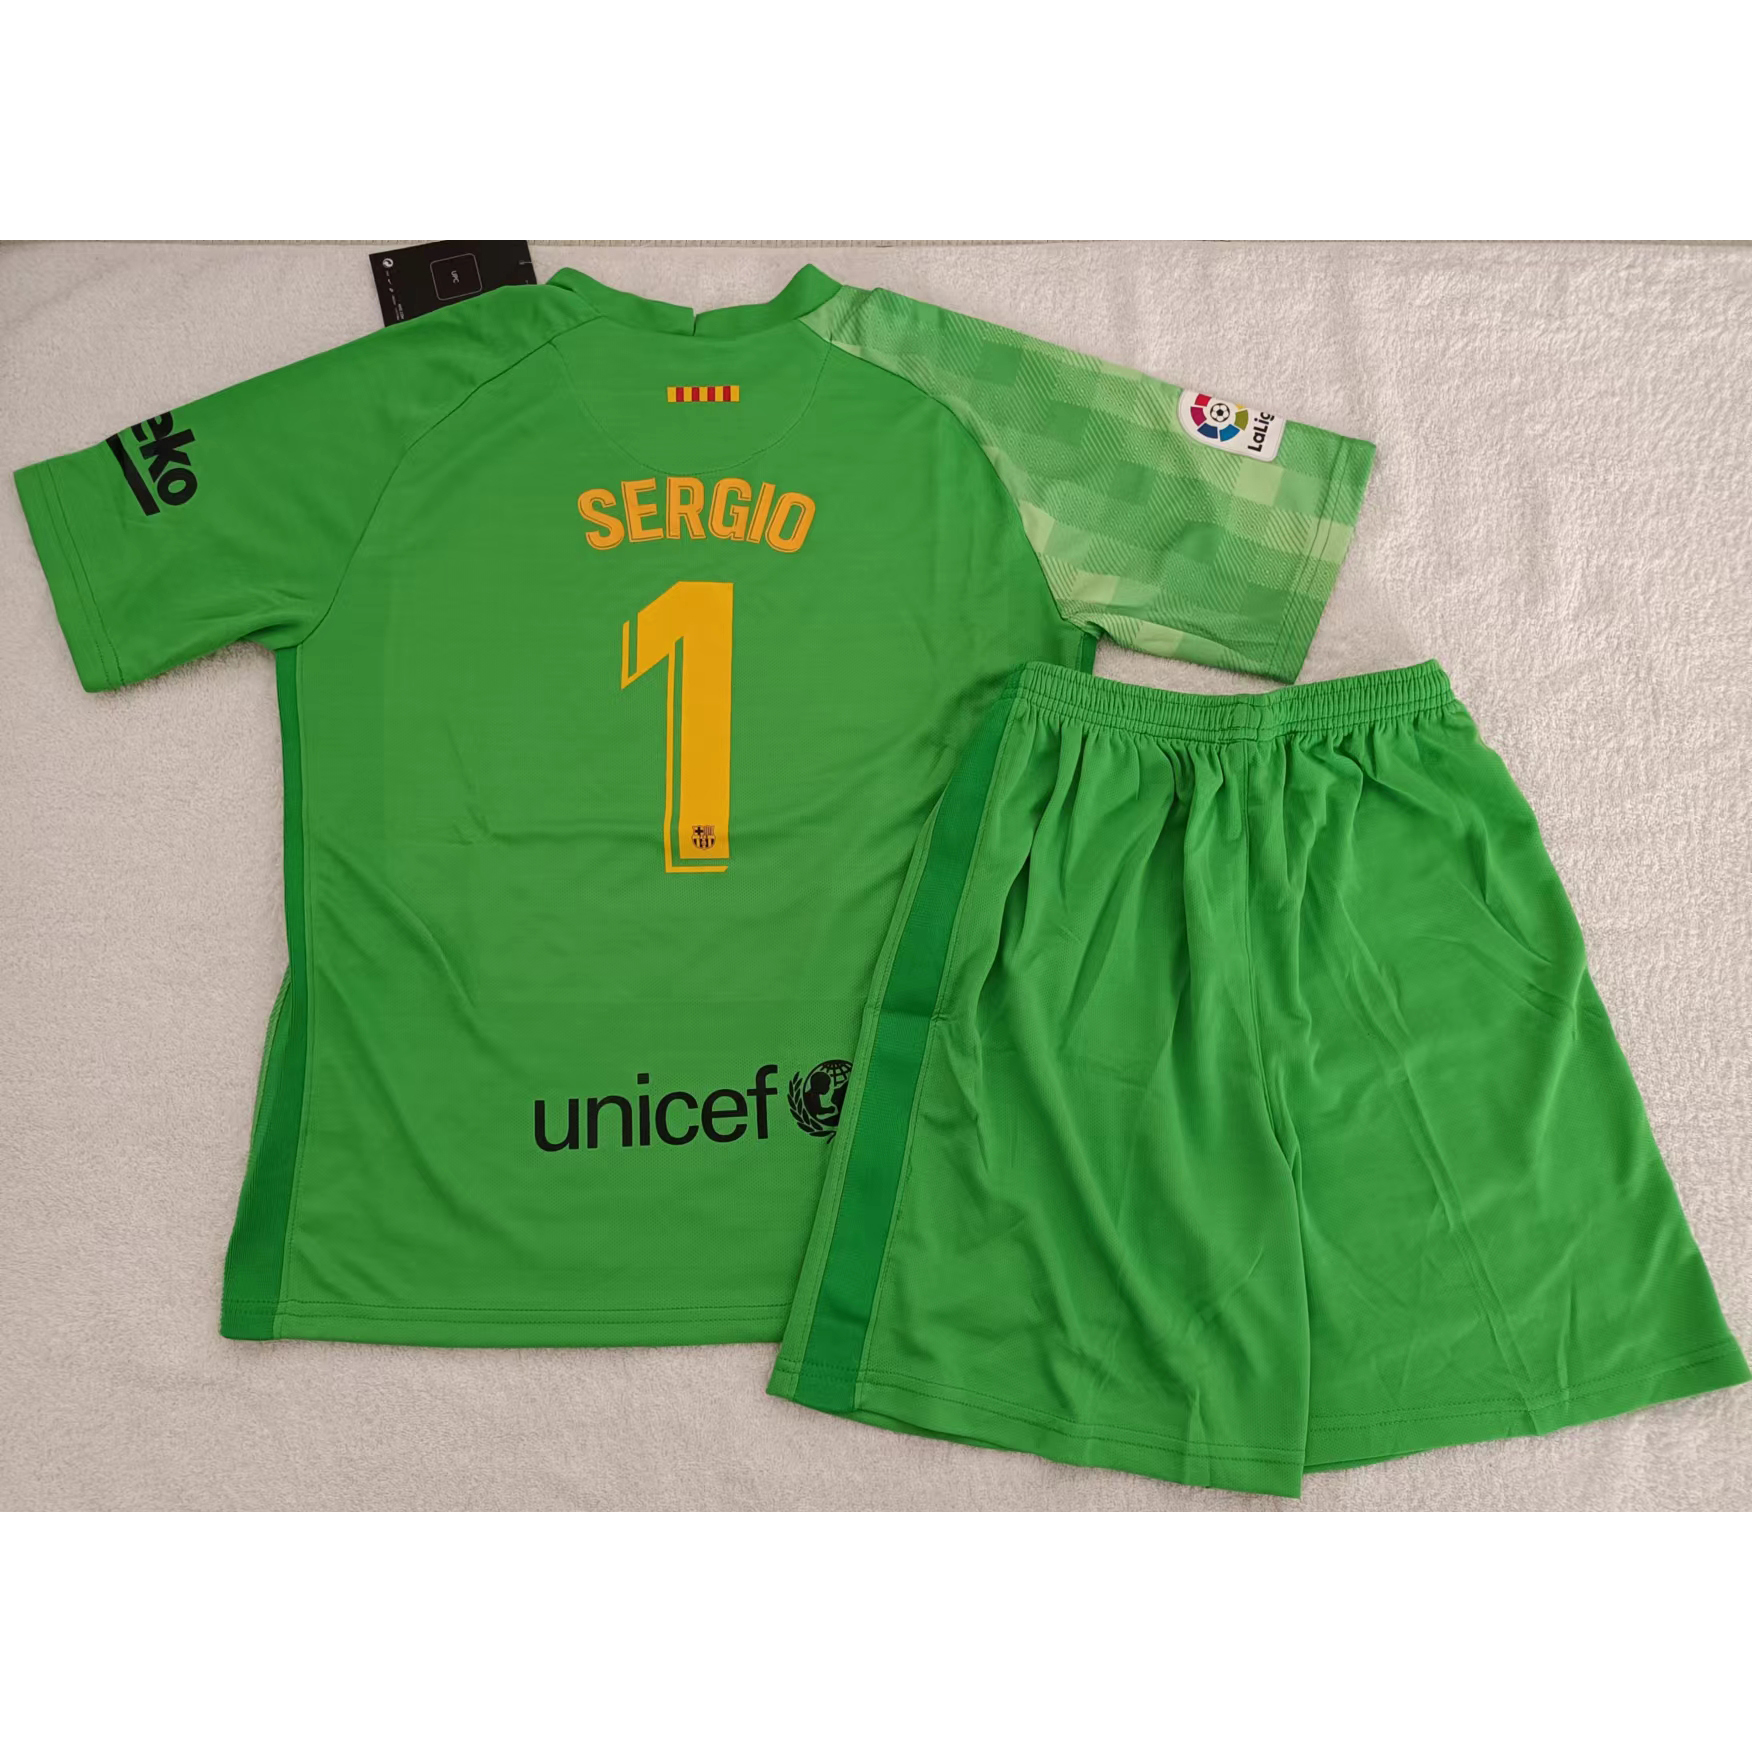 220956 Max Maillot Barcelone Enfant SERGIO 1 Vert Taille28